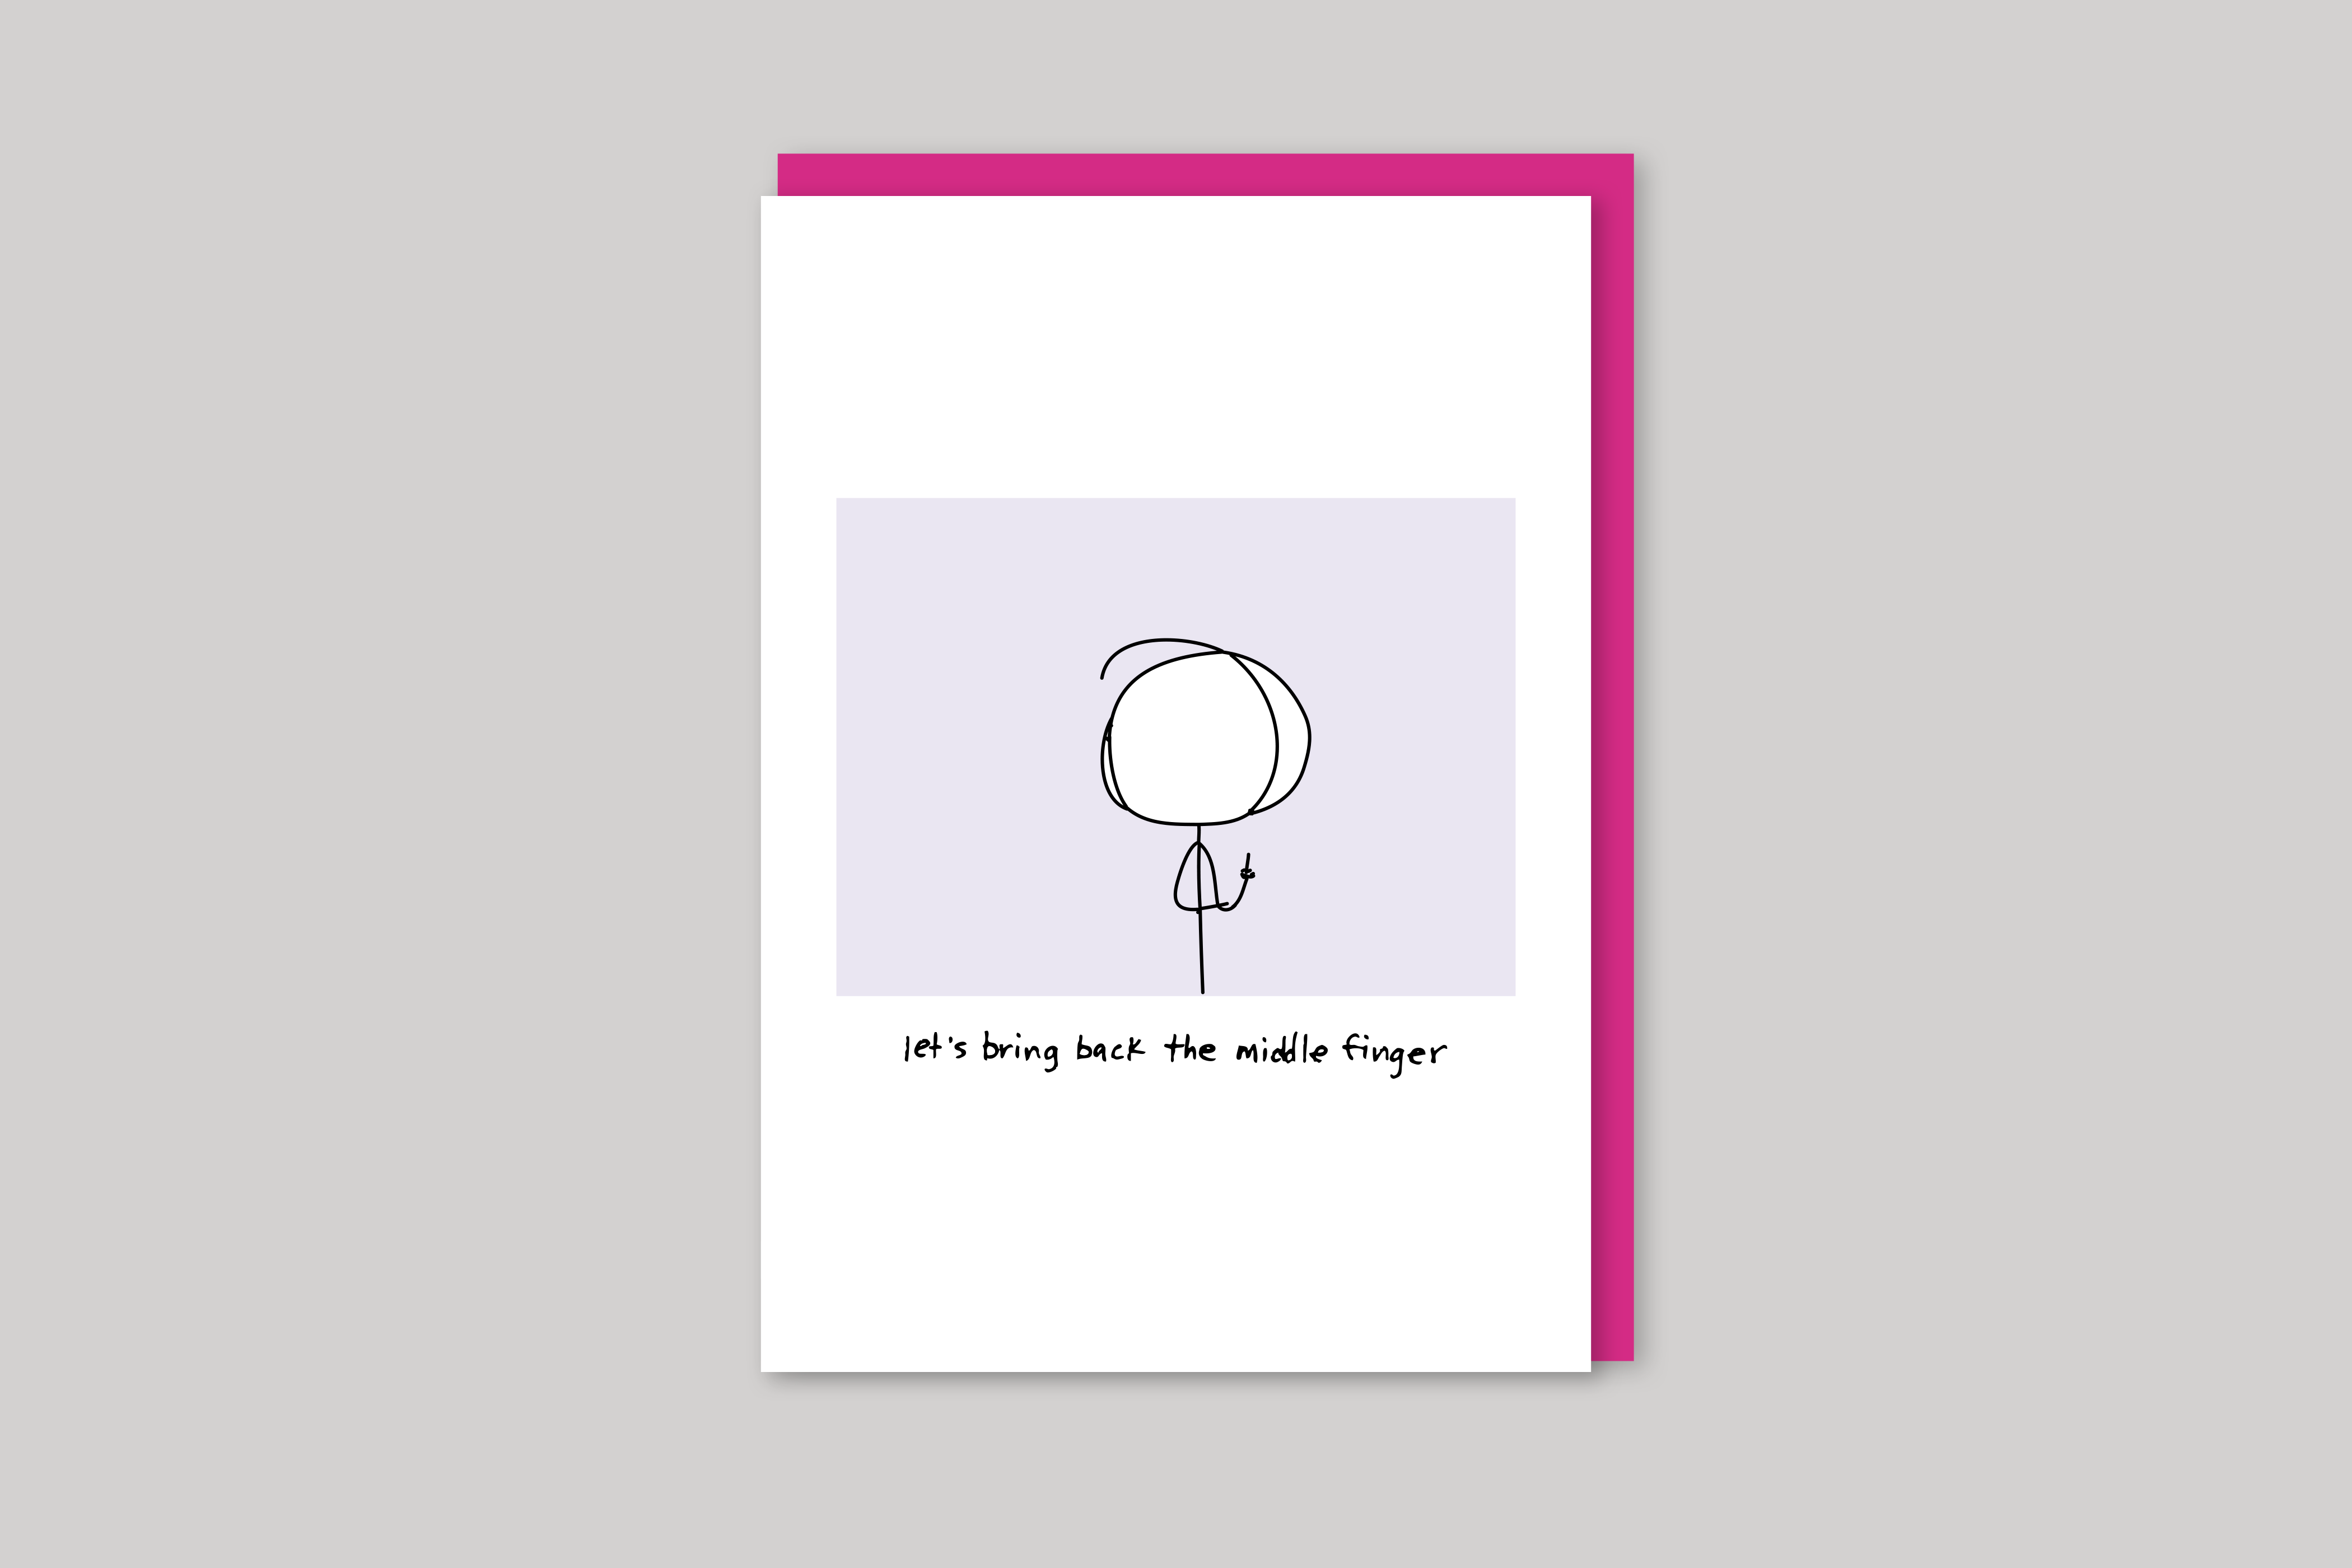 Middle Finger humorous illustration from Mean Cards range of greeting cards by Icon, back page.